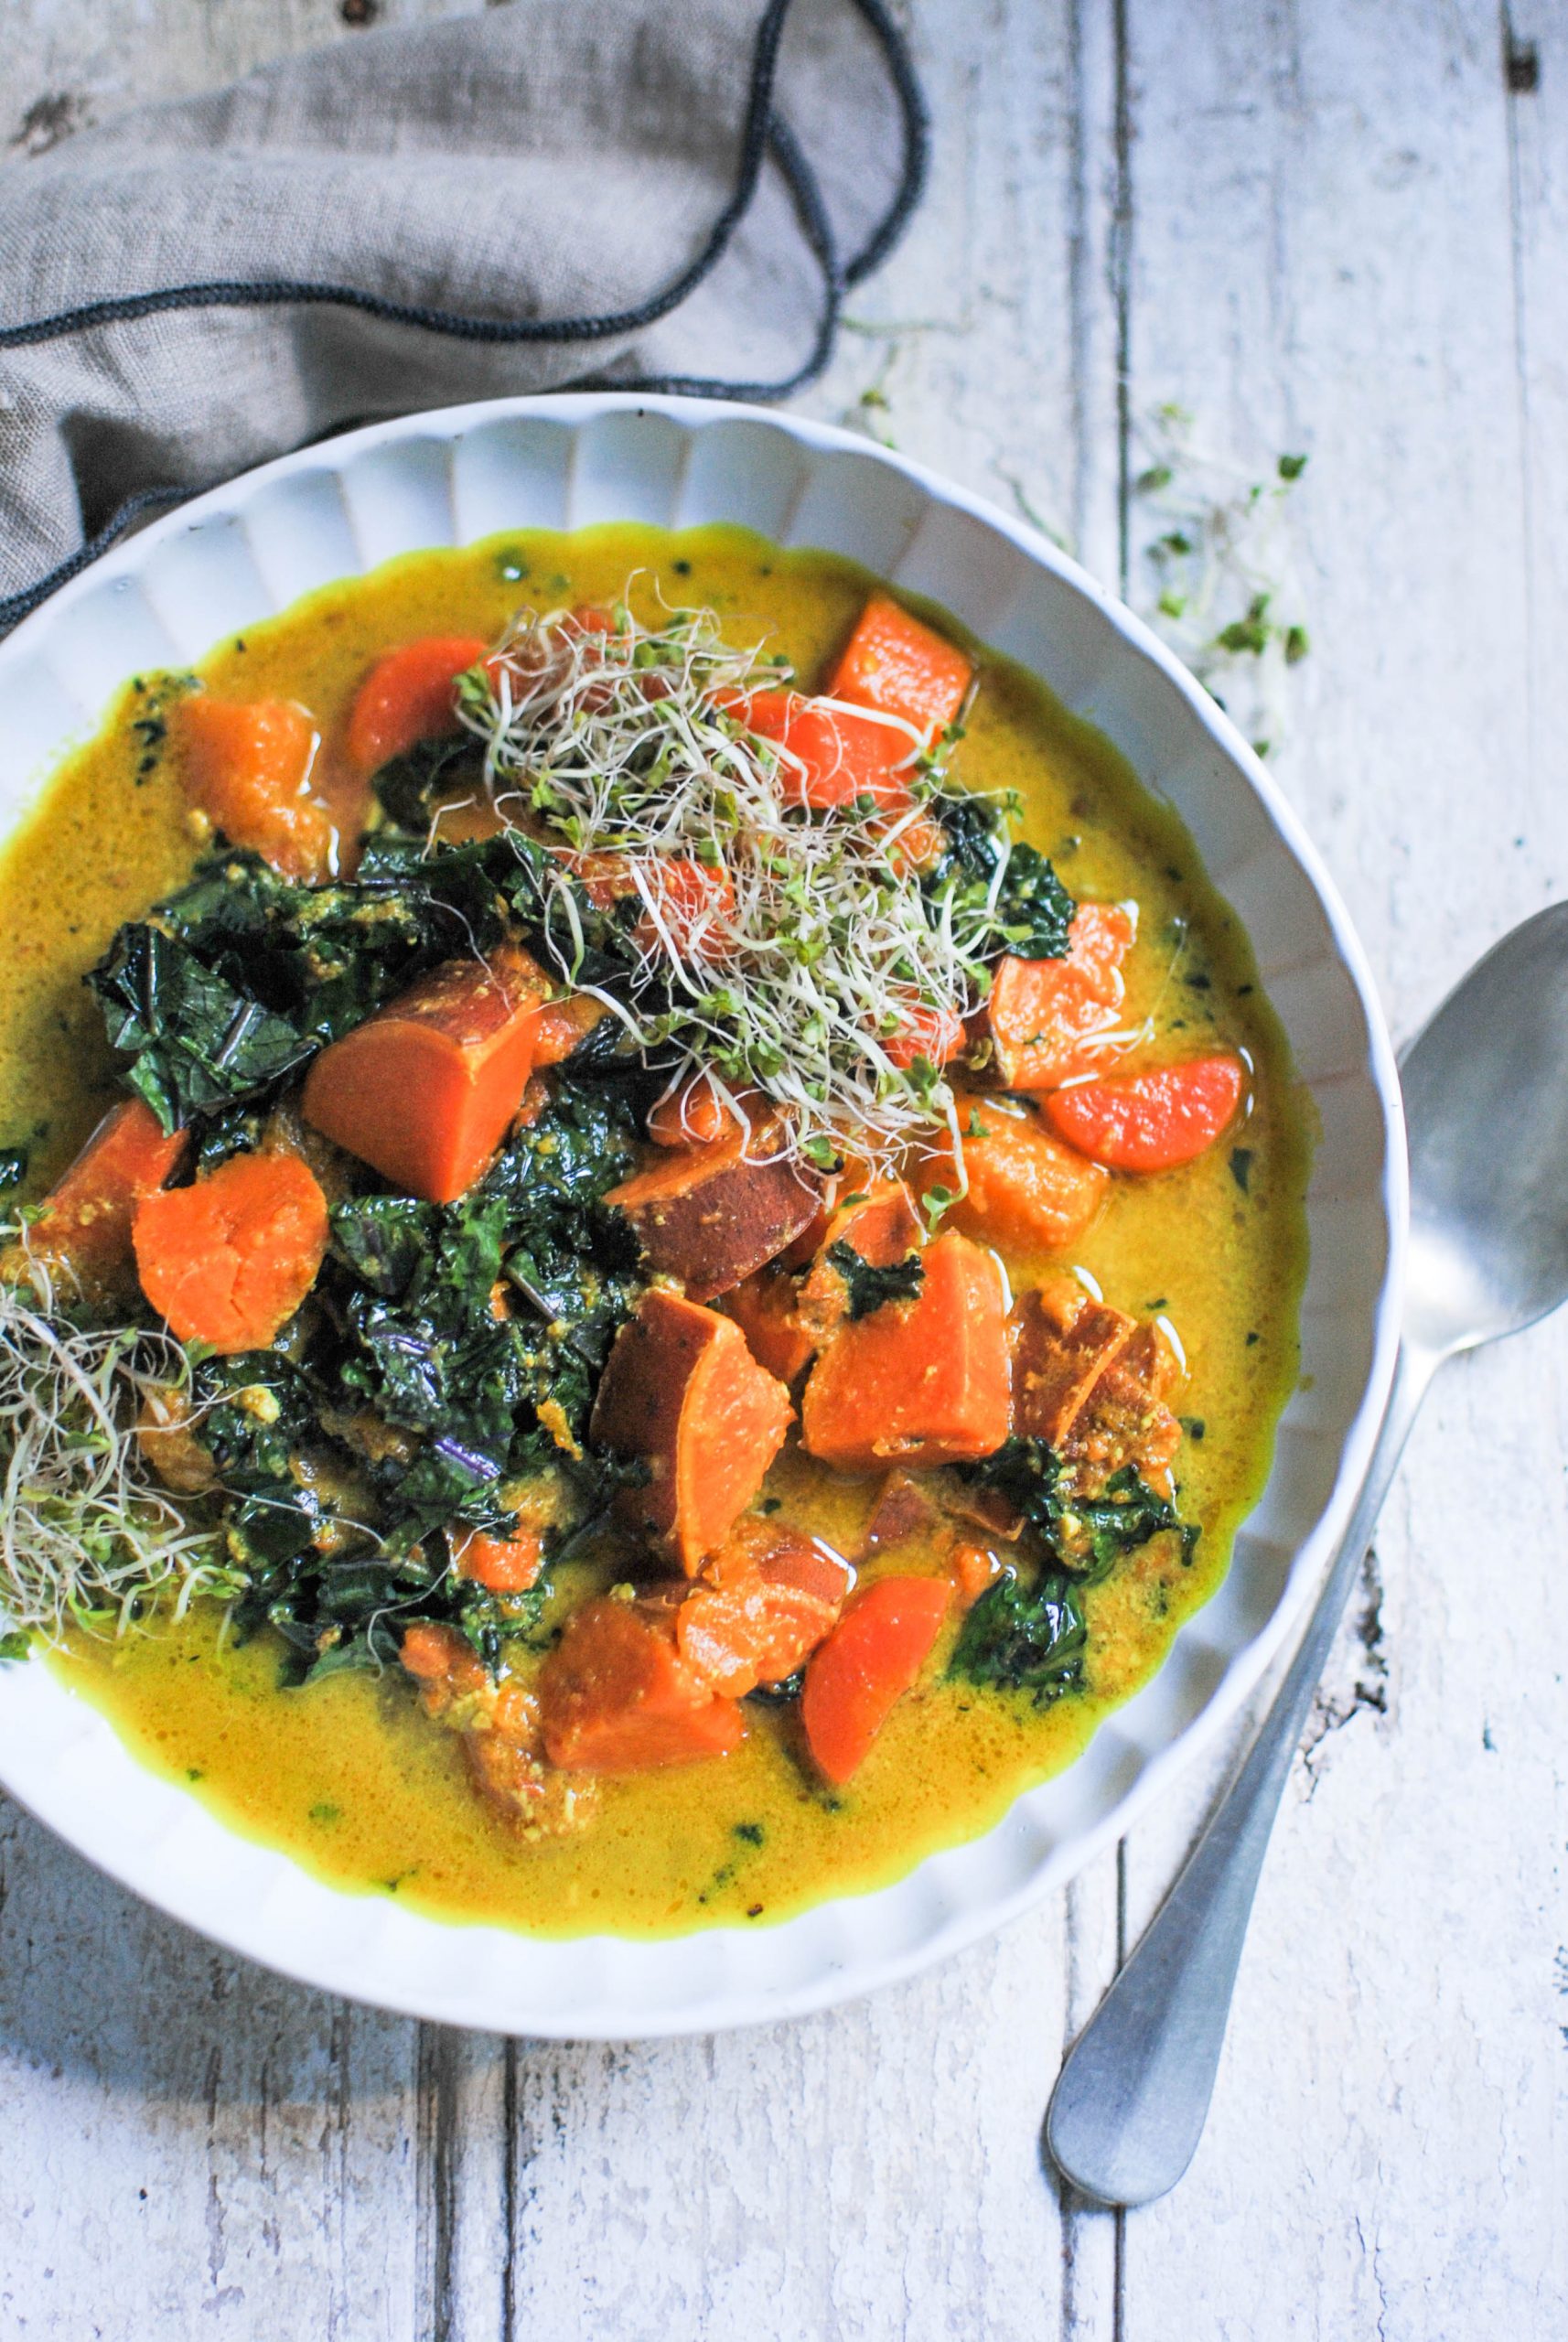 super flavouful and easy curry soup with seasonal ingredients like sweet potato, kale, carrot and pumpkin